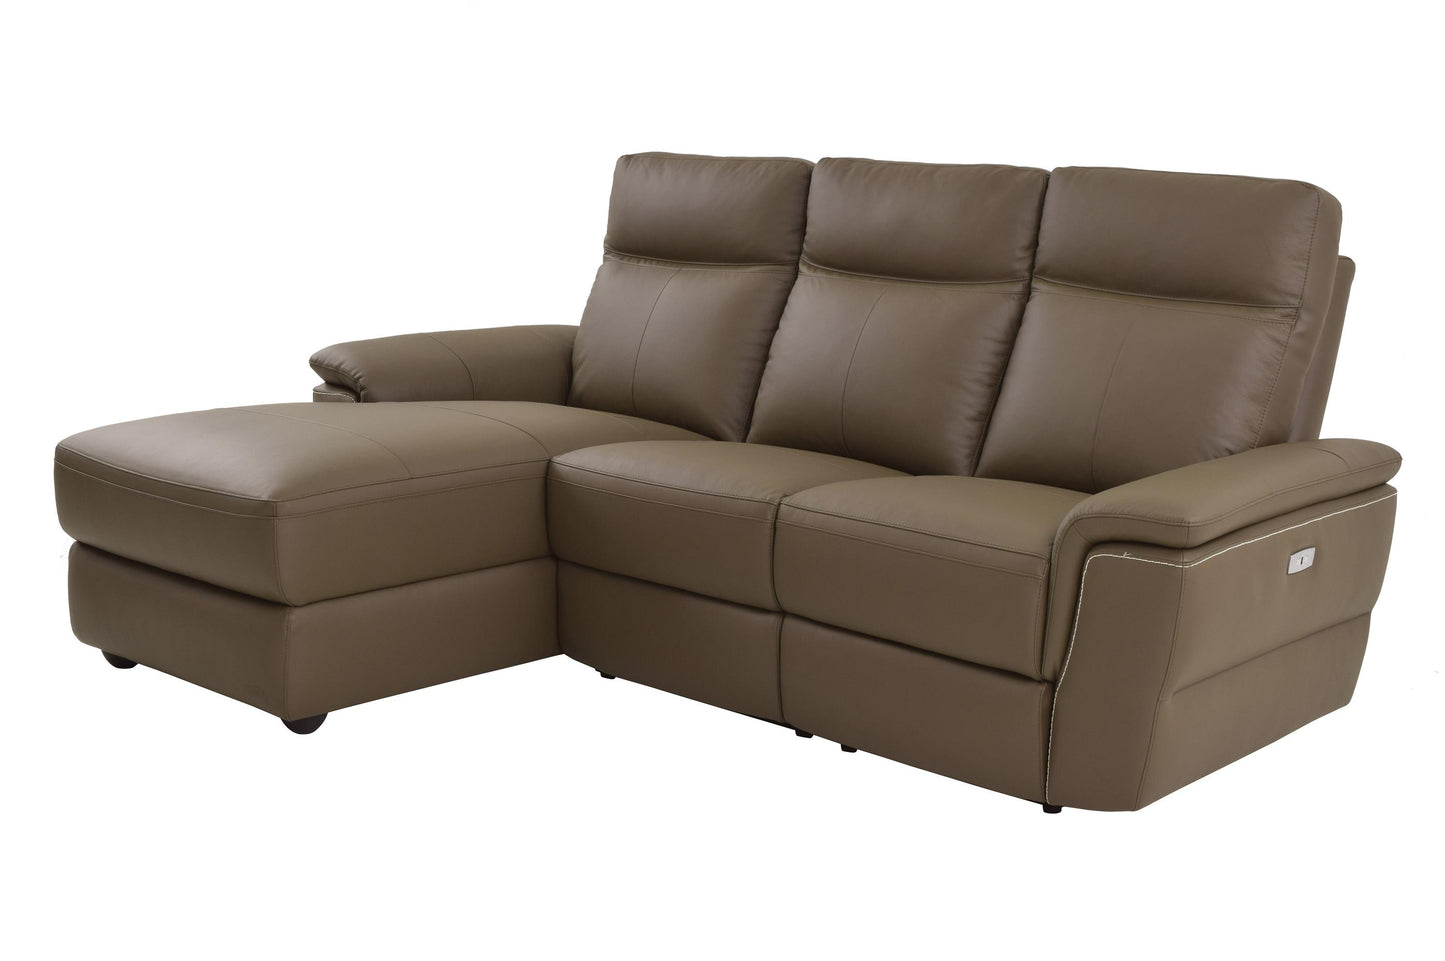 Homelegance Olympia 4PC Power Sectional Left Recliner Chair, Console, Chair & Right Chaise in Brown Taupe Top Grain Leather